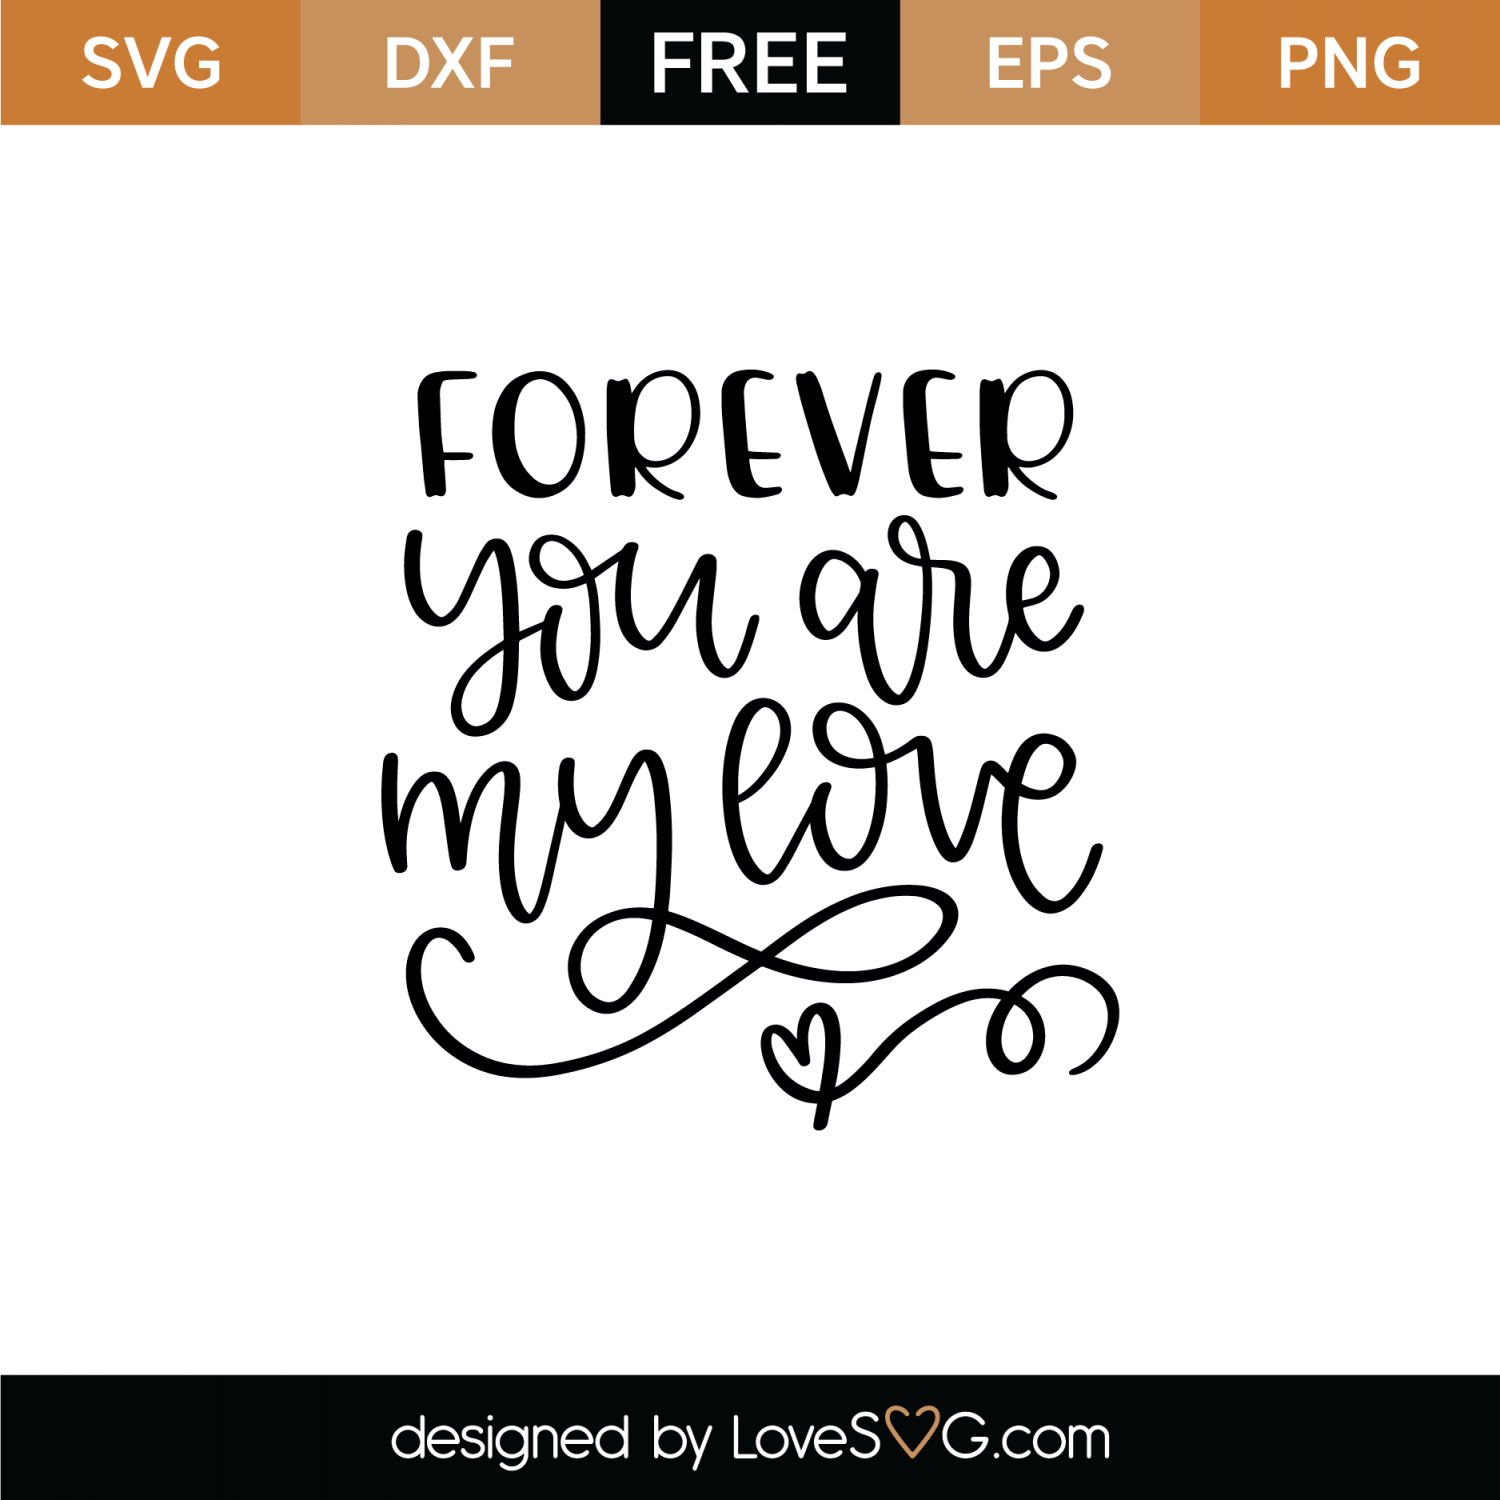 Free Forever You Are My Love SVG Cut File  Lovesvg.com